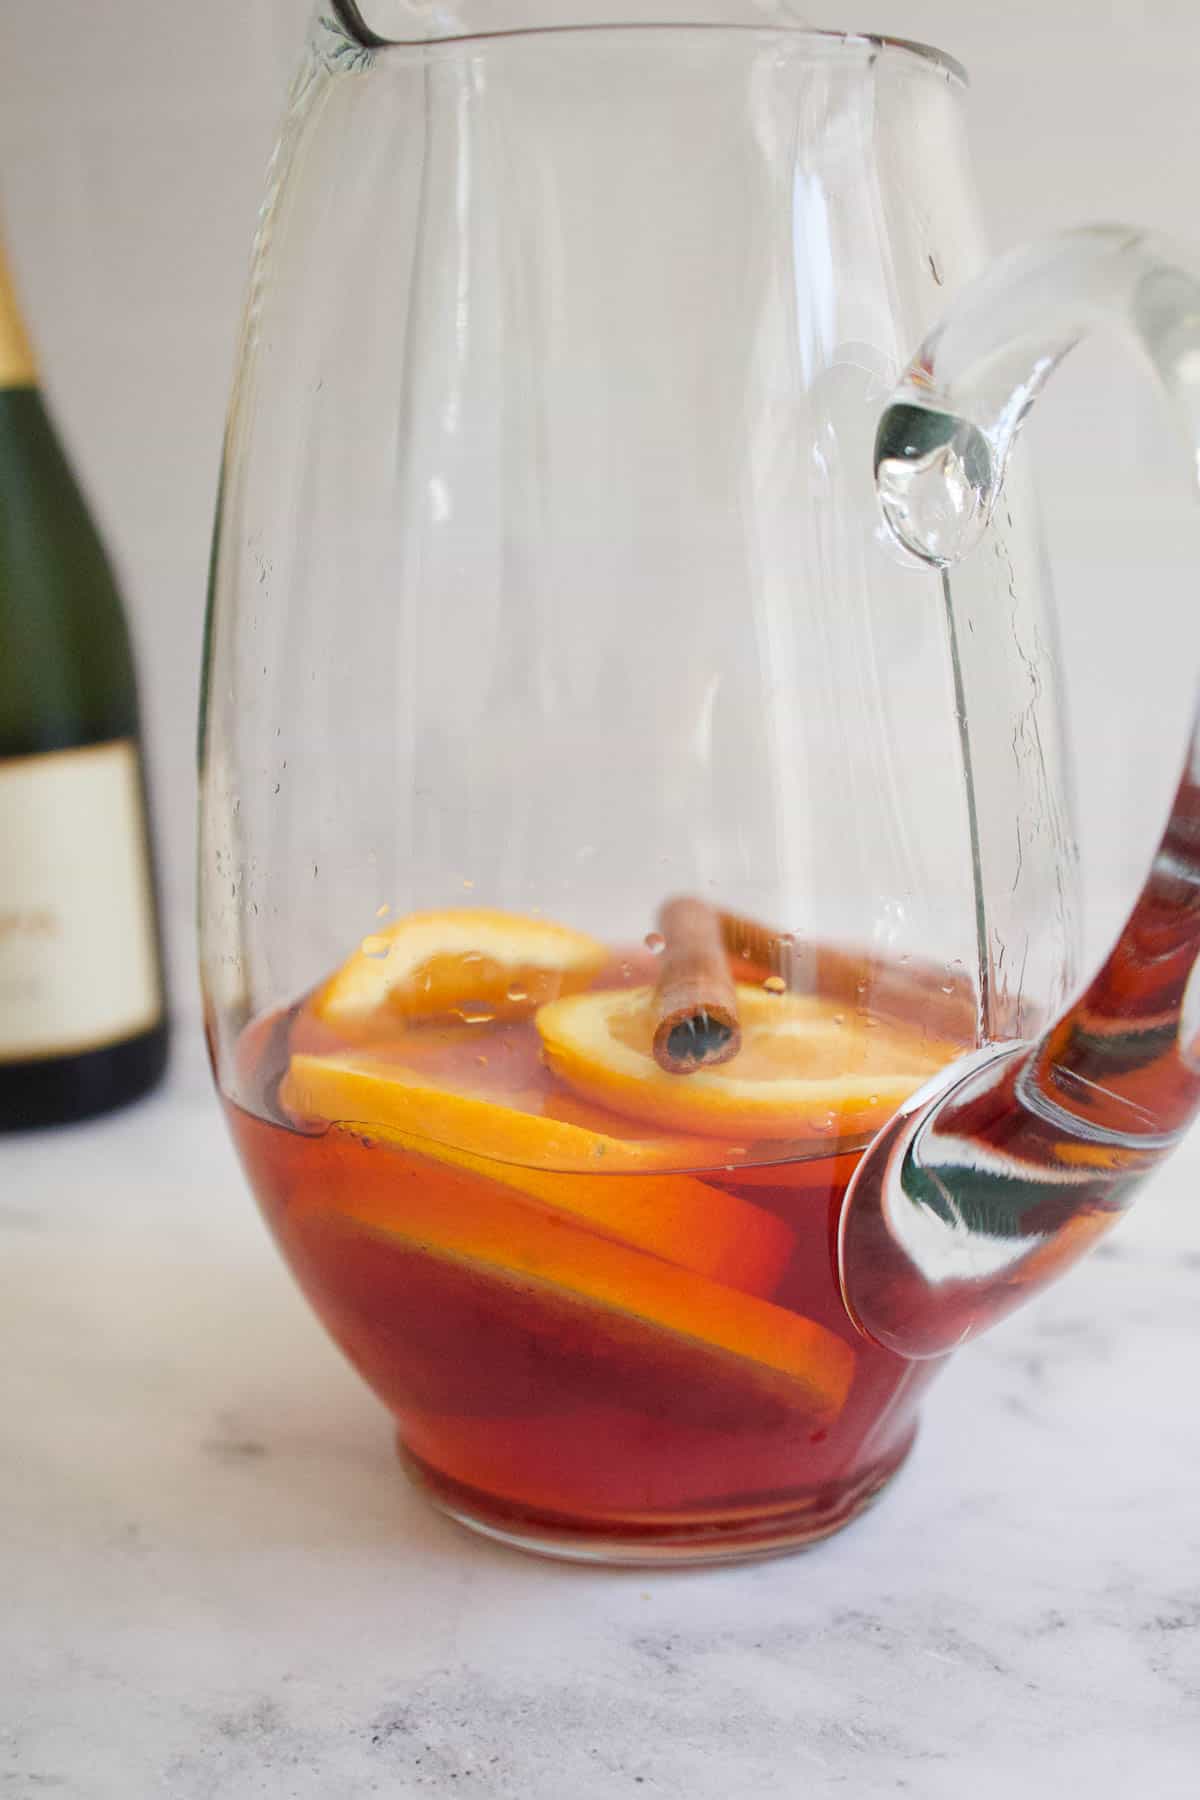 Cranberry juice, sliced oranges and cinnamon sticks in the bottom of a glass pitcher.